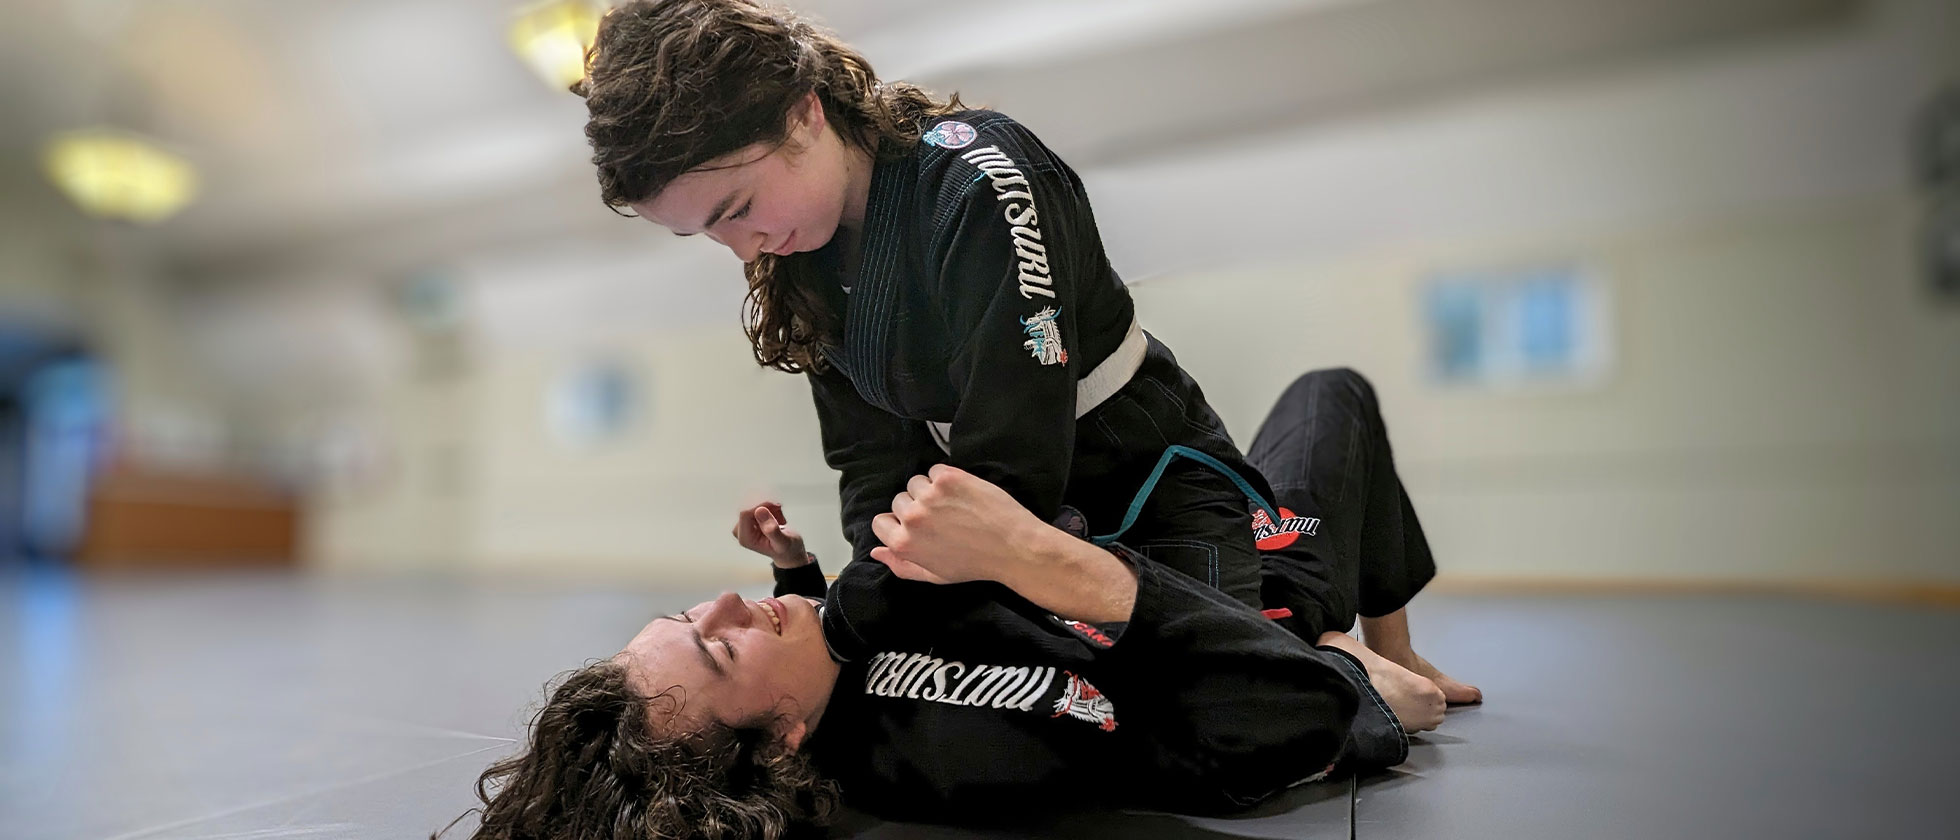 Teen Class 13-17 years old BJJ program In Strathcona County, Canada